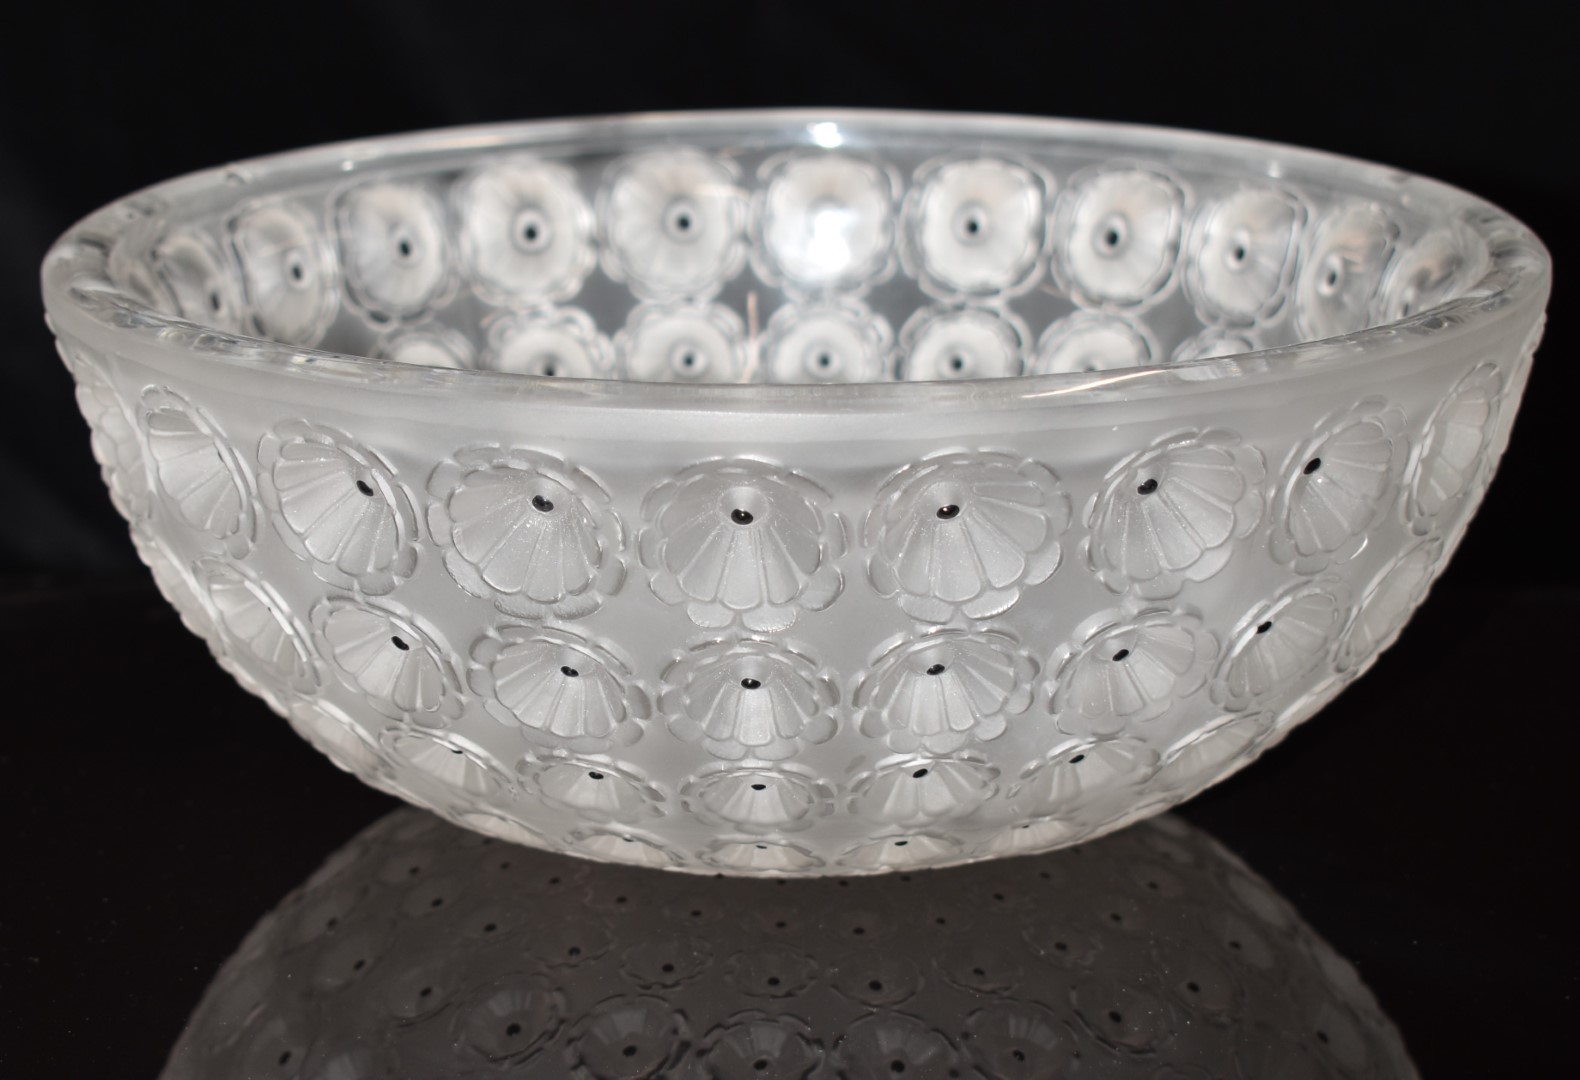 Lalique Nemours glass bowl, signed 'Lalique France' to base, 25cm in diameter - Image 4 of 4